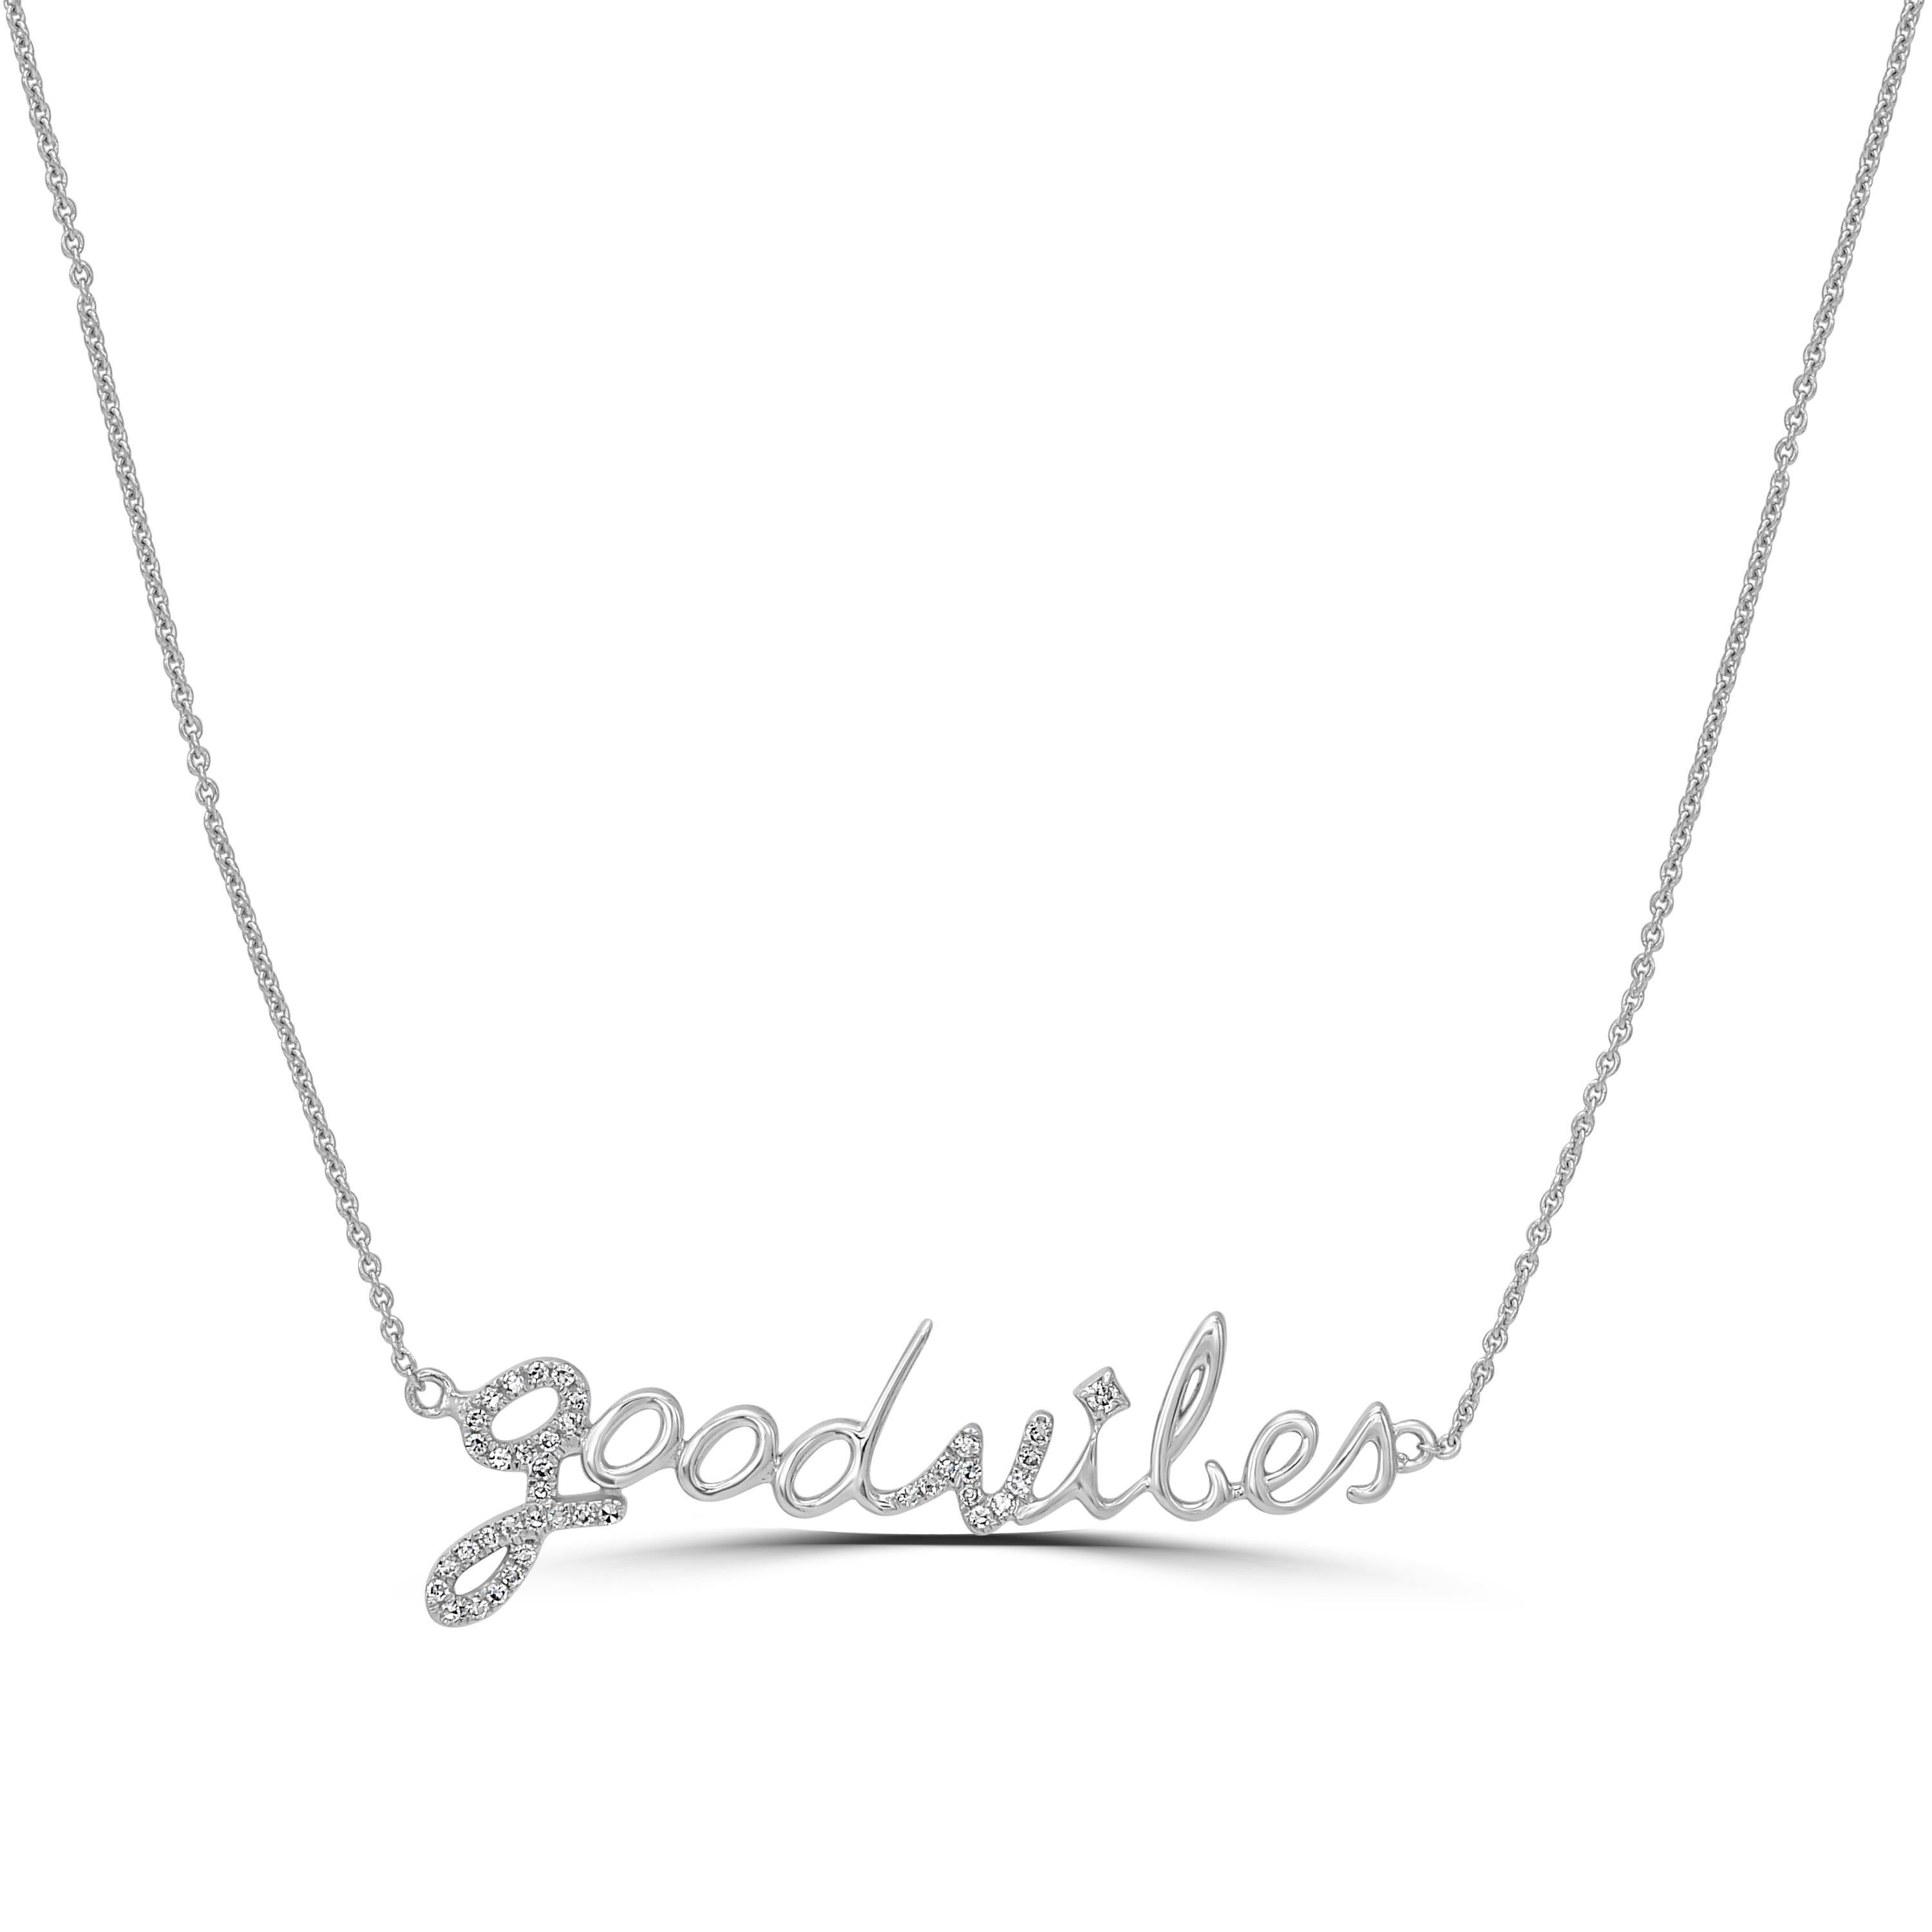 Glistening diamonds with a thoughtful pendant, a fantastic blend of both things you need. A total of 0.11 carats of round full-cut and single-cut diamonds are set in this Good Vibes inscribed motif. This Good Vibes pendant is made of 14K white gold